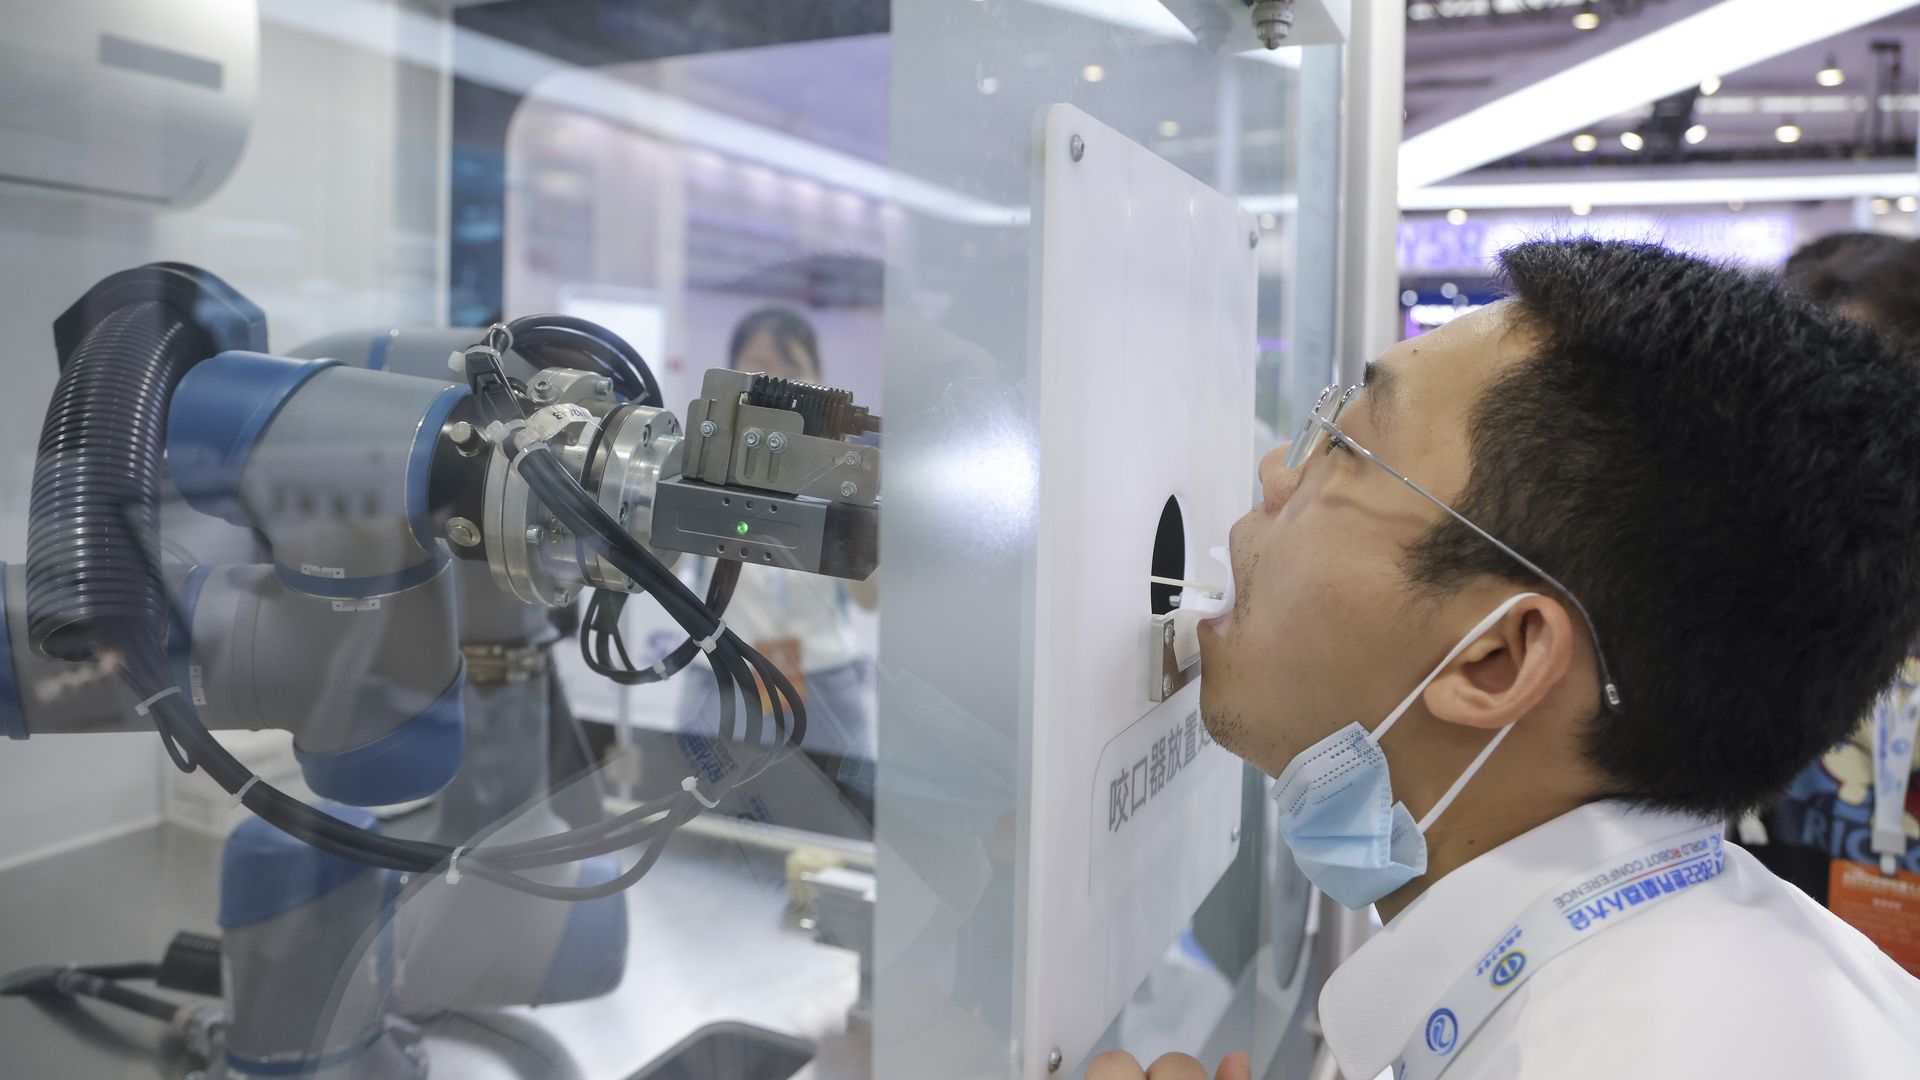 A robot performs a COVID test at the 2022 World Robot Conference in Beijing, China.